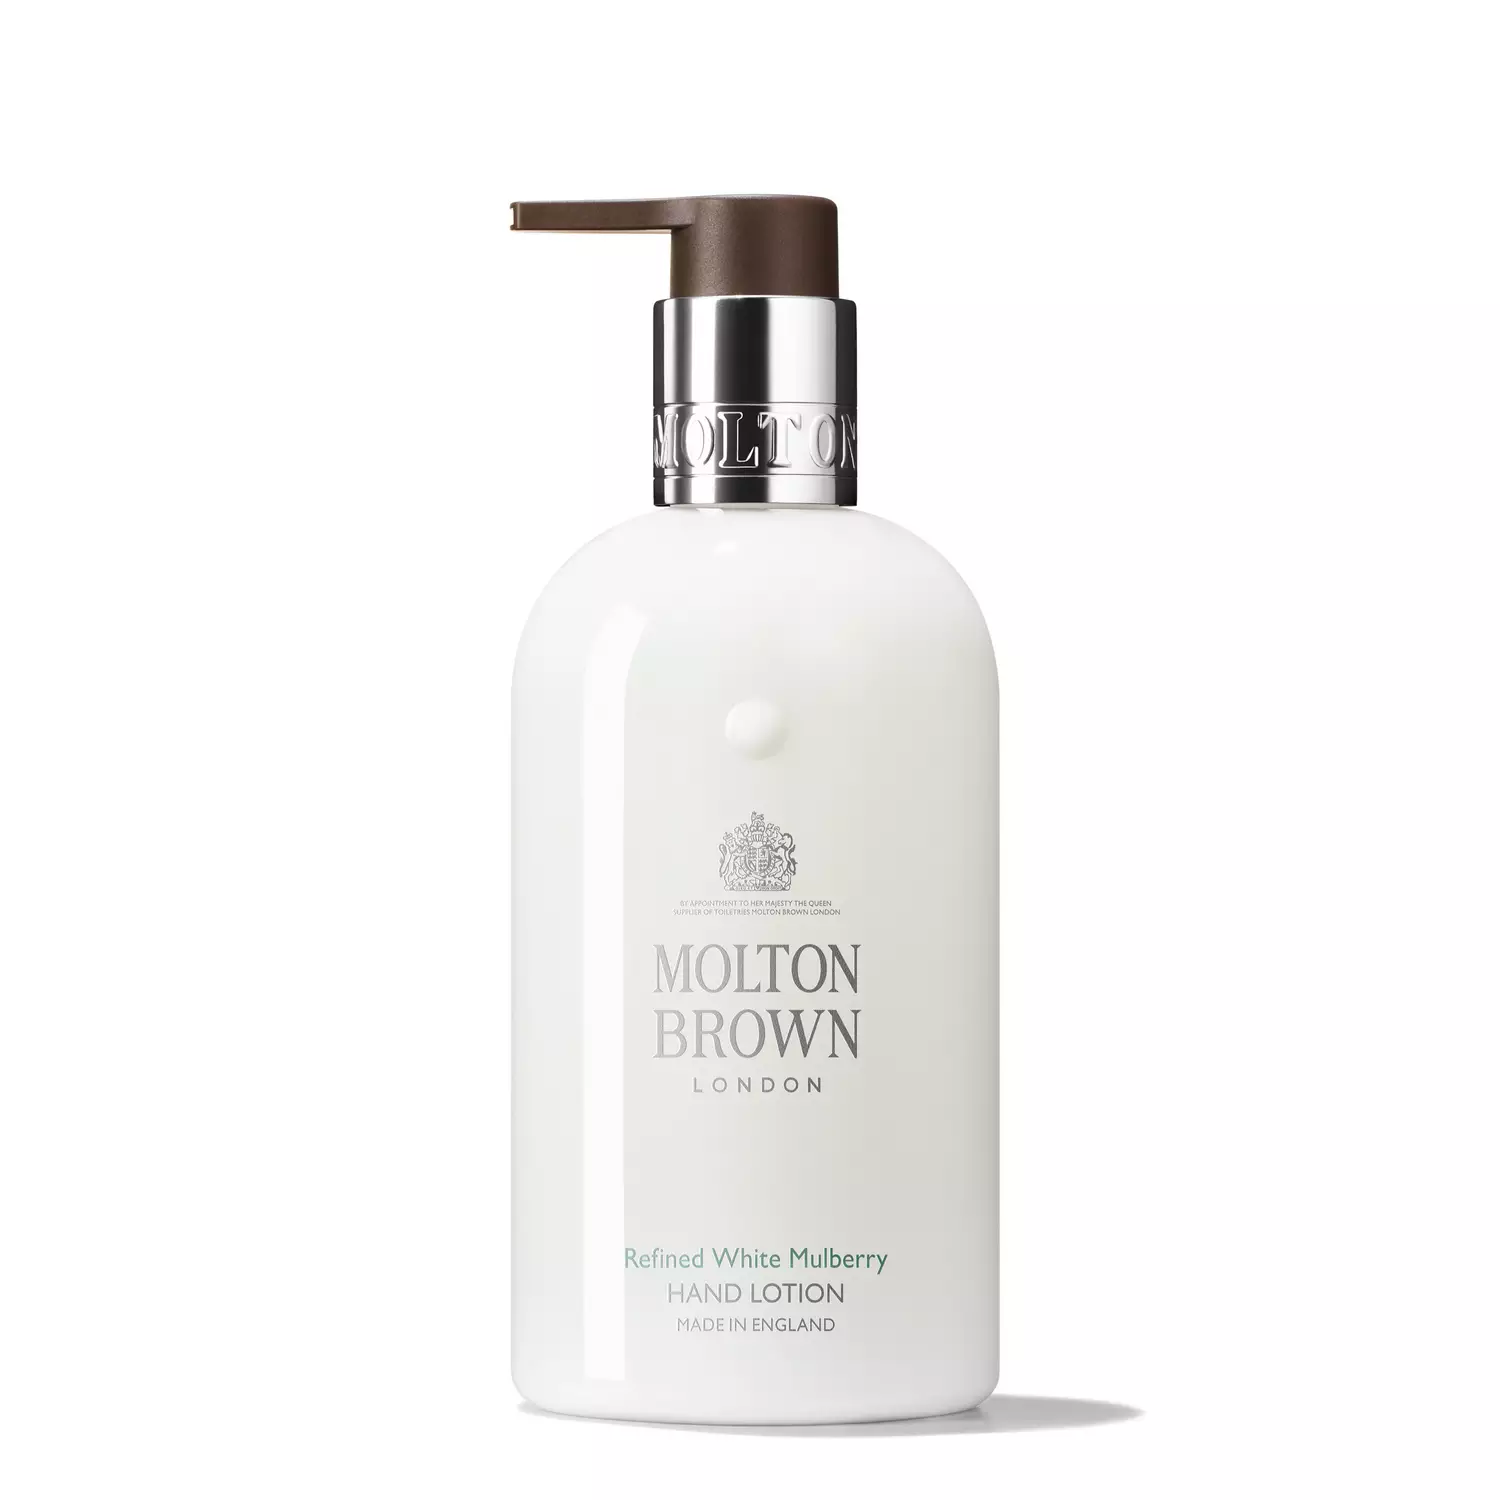 Molton Brown - Refined White Mulberry - Hand Lotion 